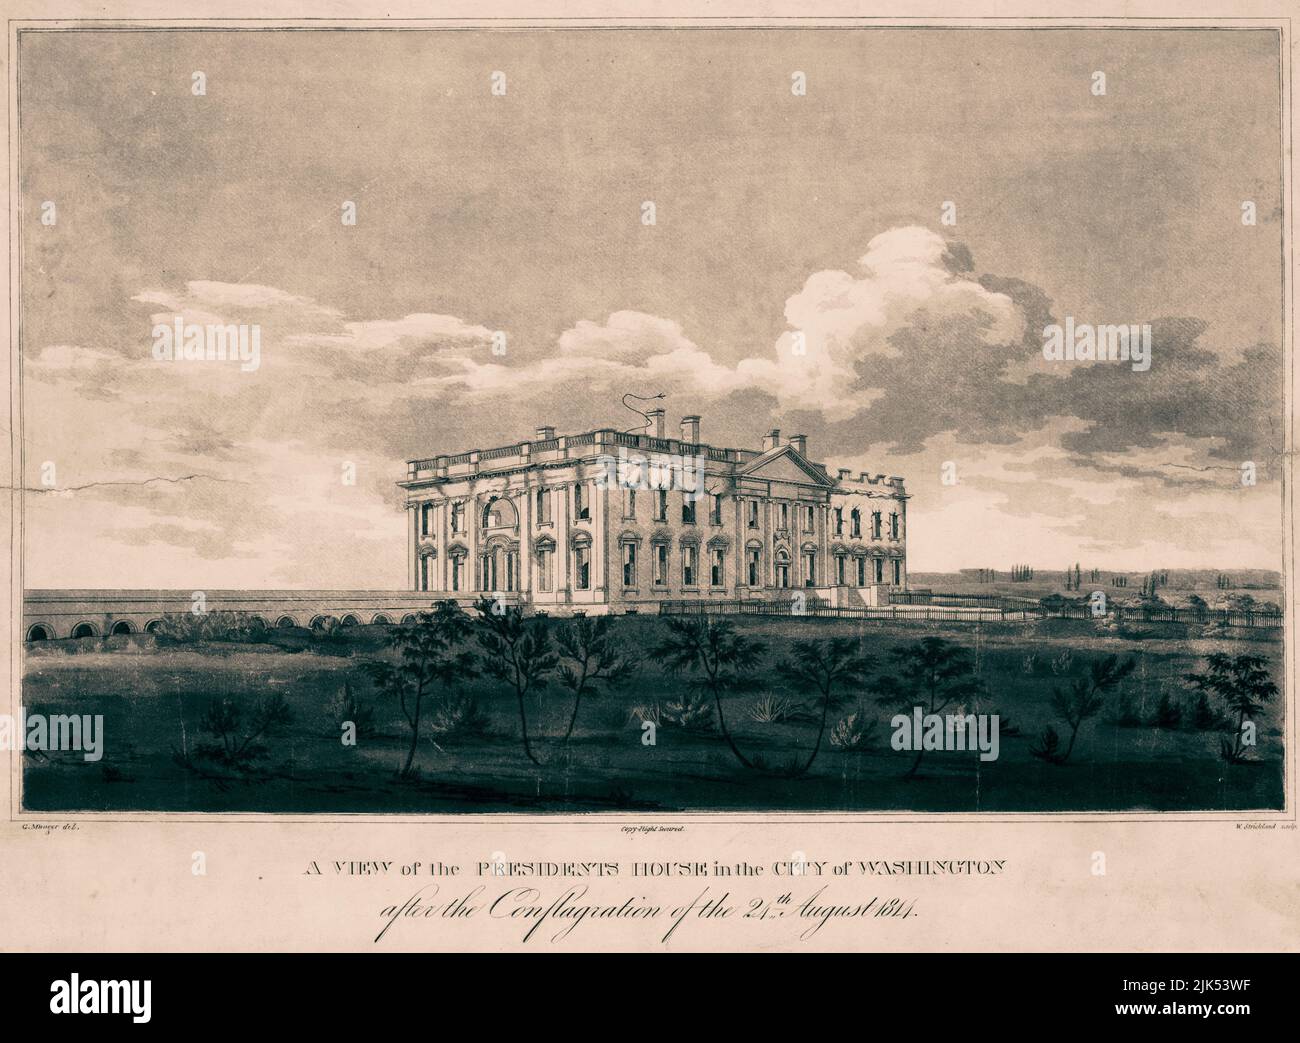 A view of the Presidents house- the White House - in the city of Washington after the conflagration of the 24th August 1814 . Print shows a view from northeast of the fire-damaged White House, a result of the War of 1812. On August 24, 1814, British general Robert Ross led his troops into Washington with strict orders to burn only public buildings. On August 25, a tornado blew through the city, bringing torrential rains that quelled both fires and British desire to pursue further action in Washington. George Munger drawing. Stock Photo